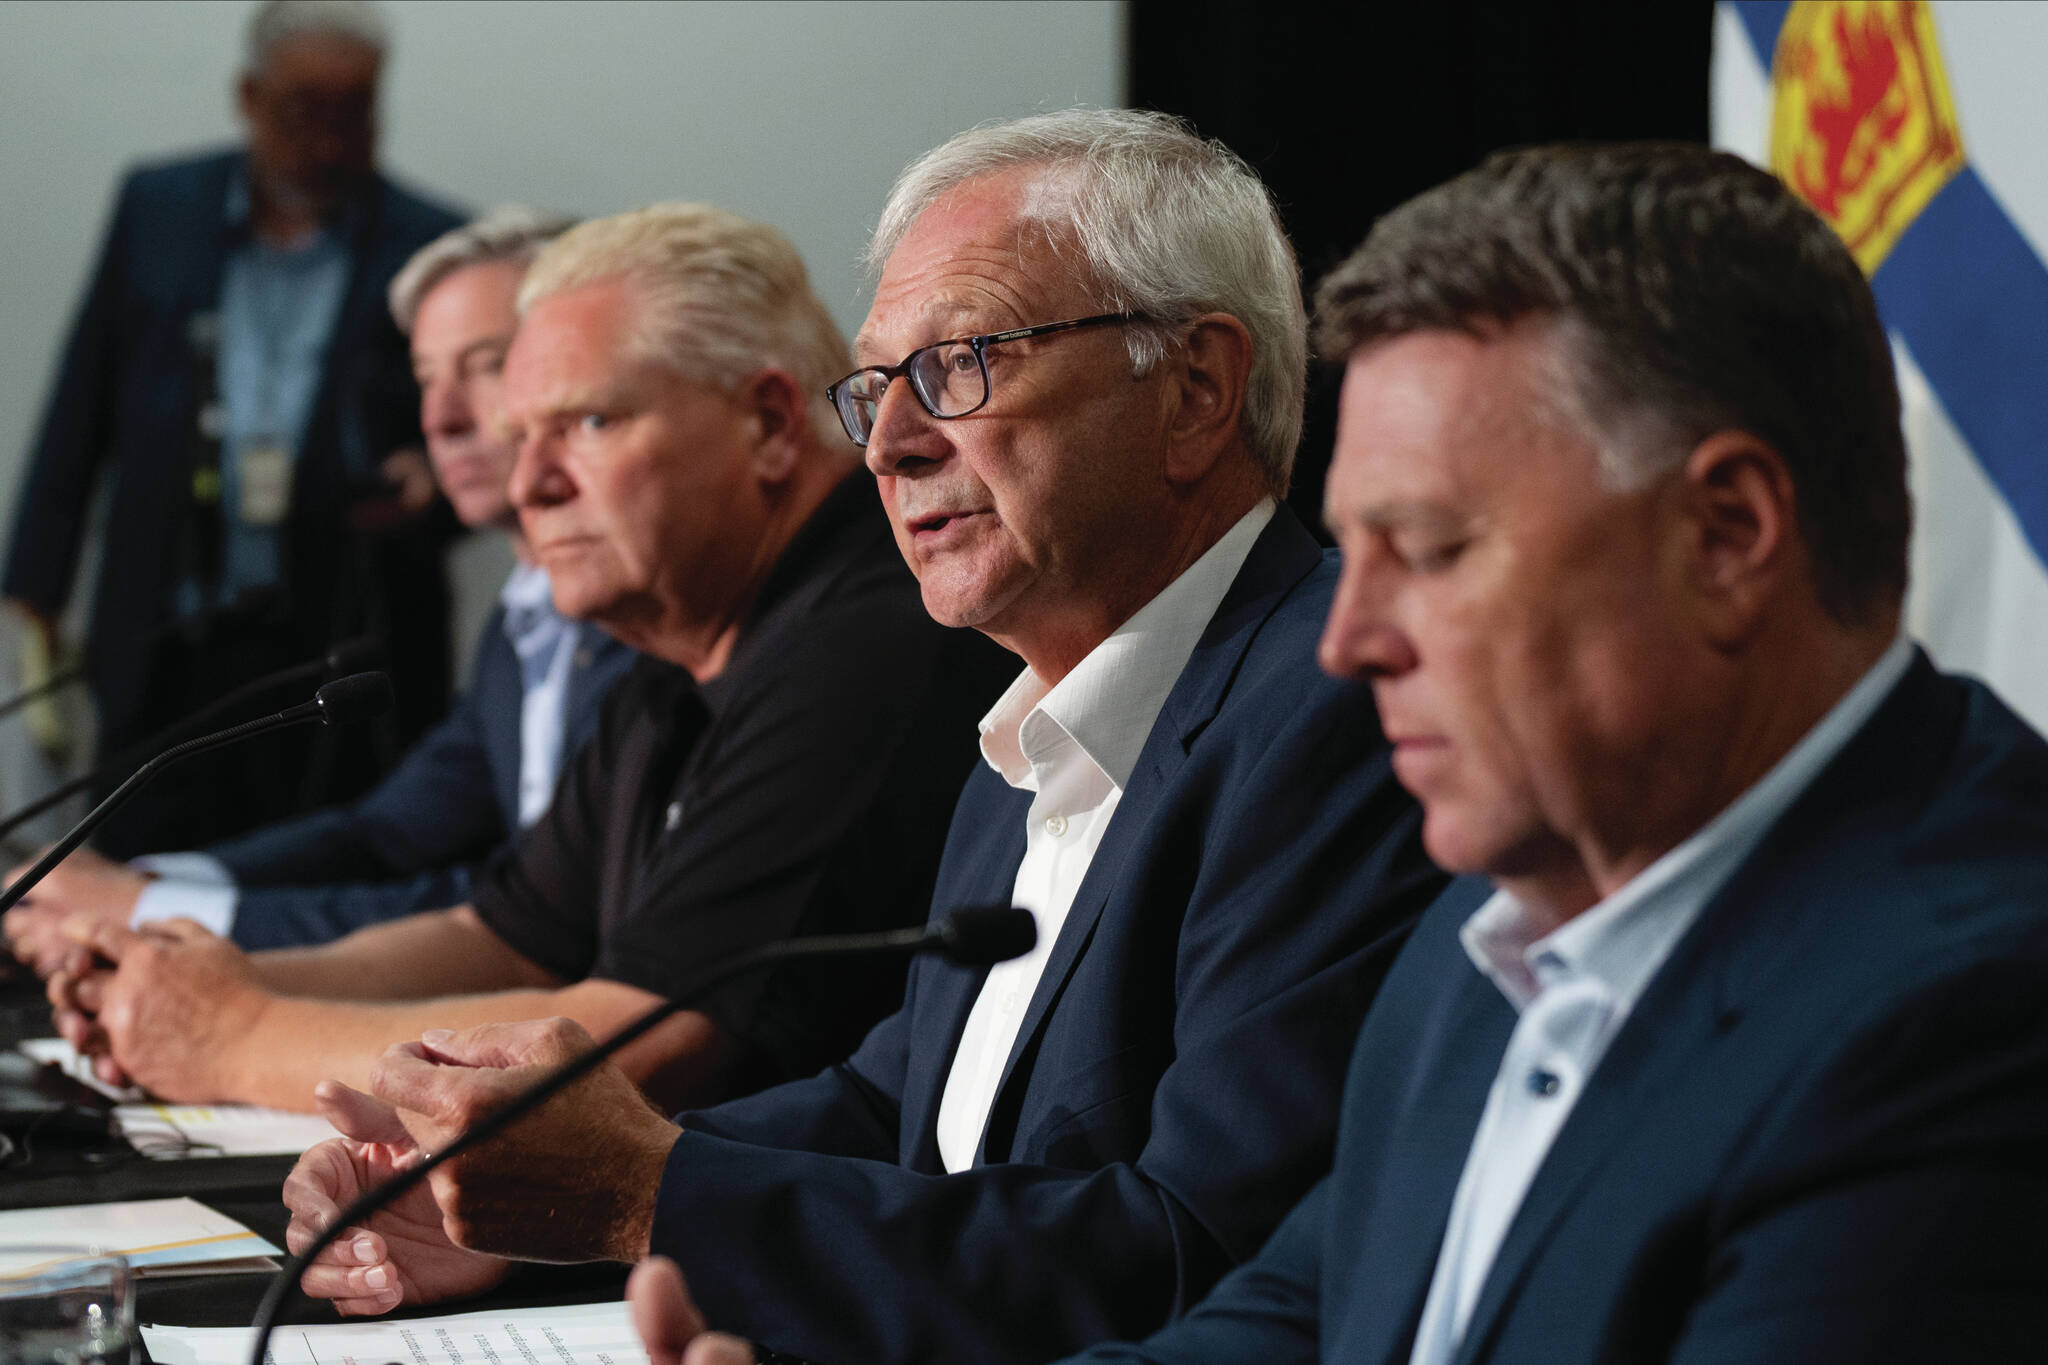 New Brunswick Premier Blaine Higgs, second from right, speaks during a press conference with, from left to right, Nova Scotia Premier Tim Houston, Ontario Premier Doug Ford, and Prince Edward Island Premier Dennis King in Moncton, N.B. on Monday, August 22, 2022. THE CANADIAN PRESS/Darren Calabrese